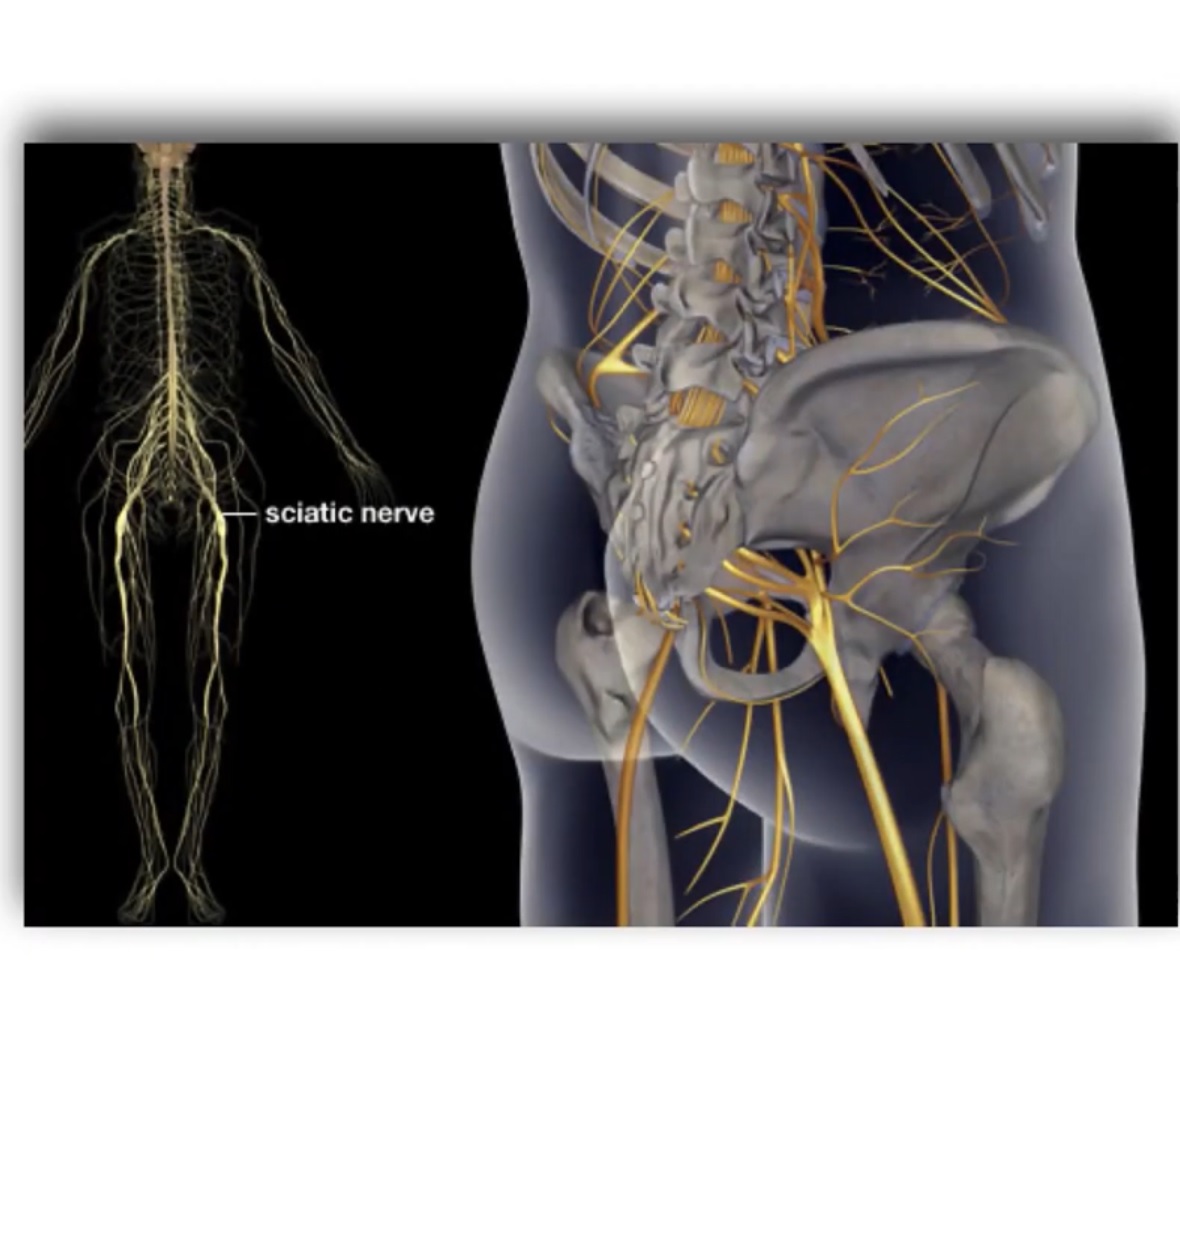 Albums 95+ Pictures Show Me A Picture Of The Sciatic Nerve Full HD, 2k, 4k